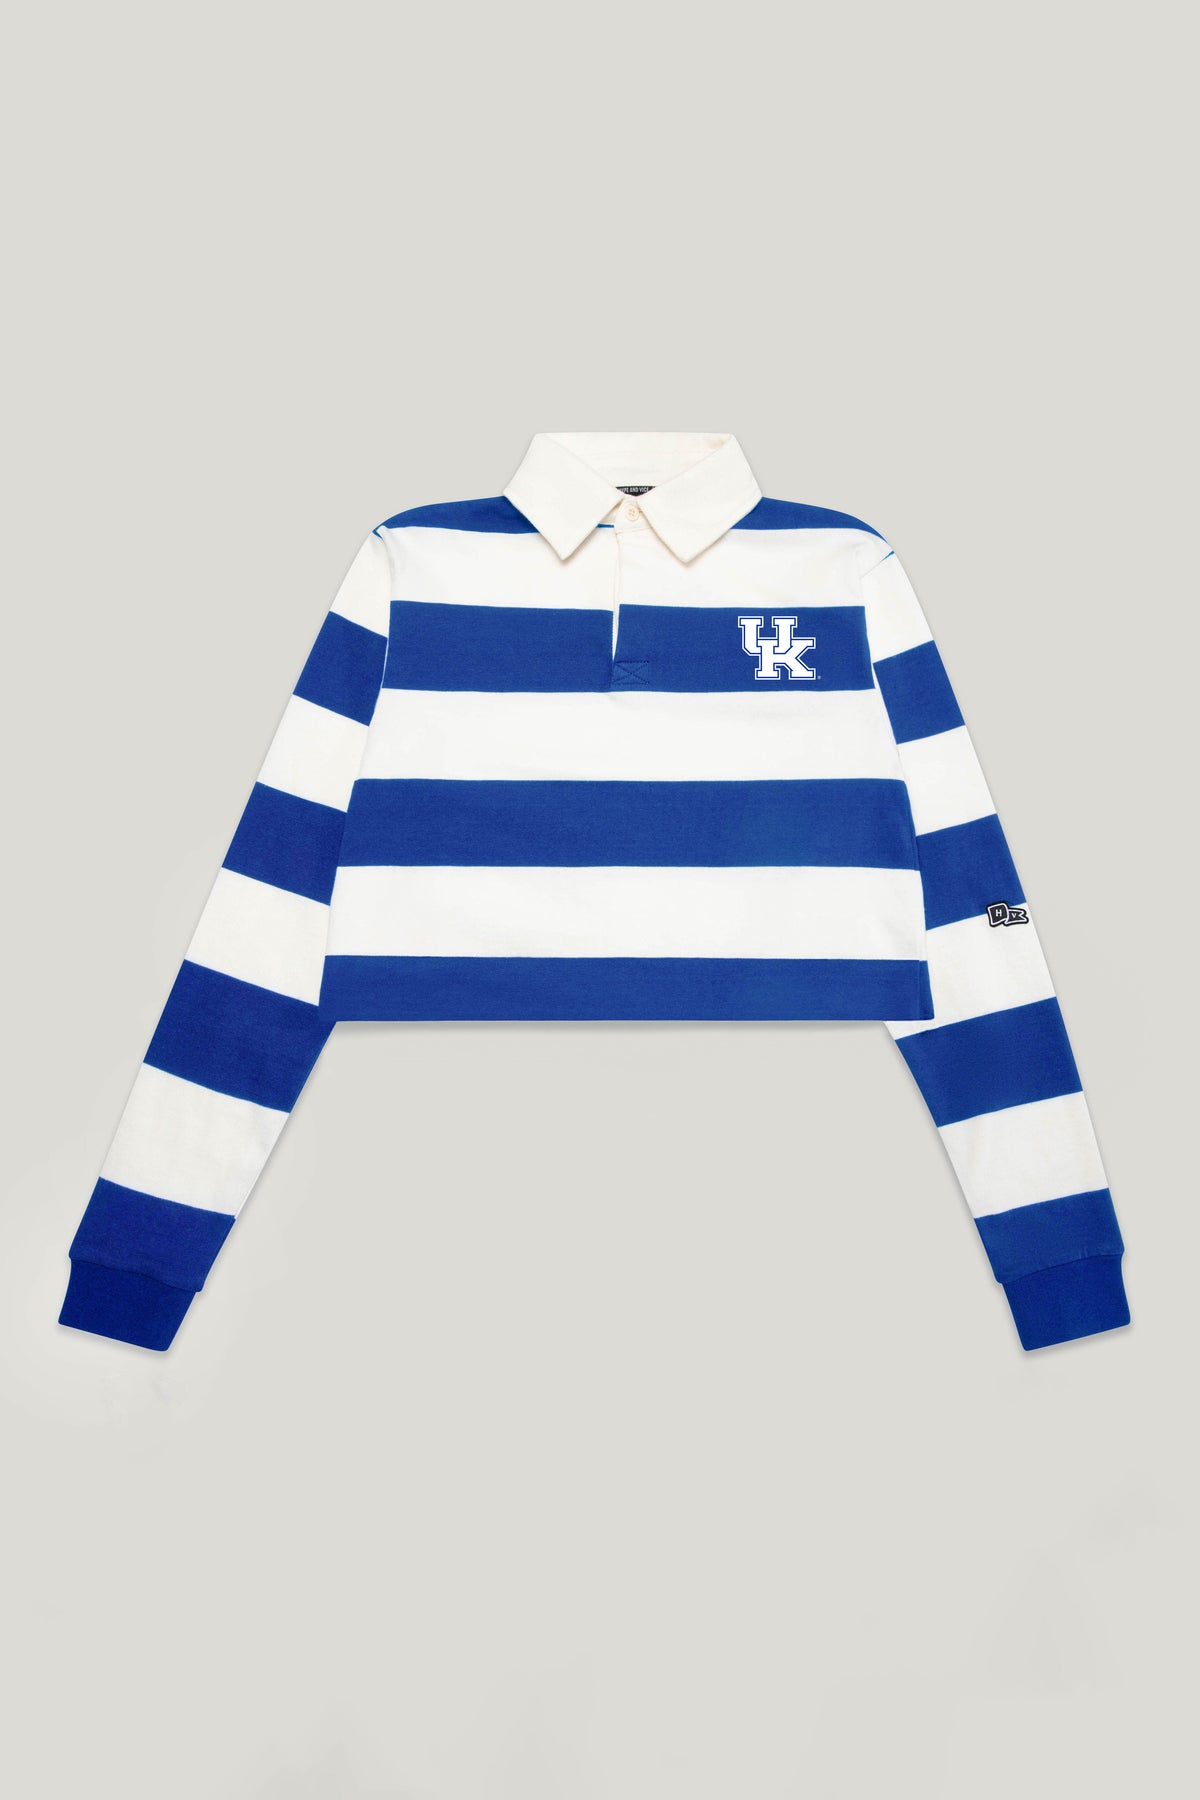 University of Kentucky Rugby Top